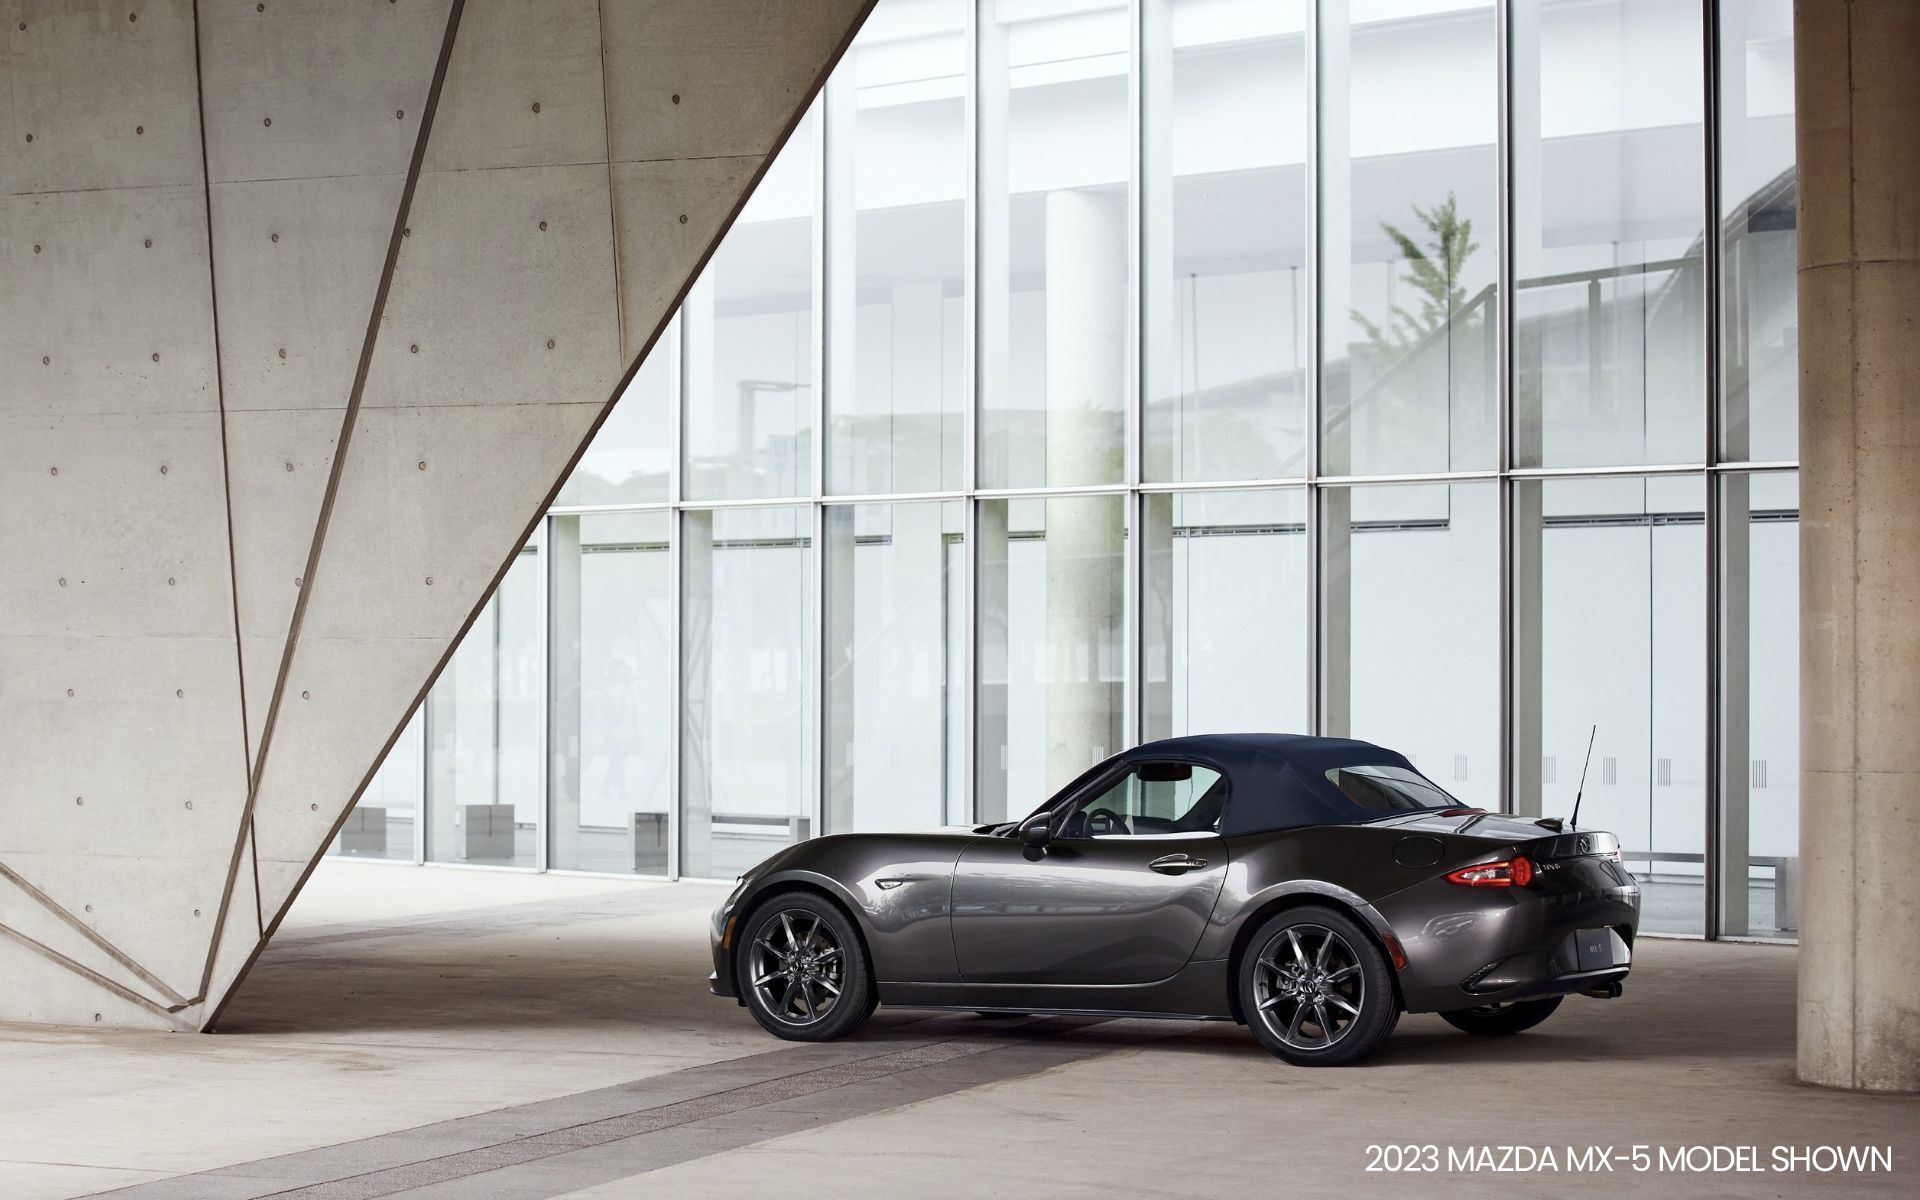 What We Know About the Electrified 2026 MX-5 Miata